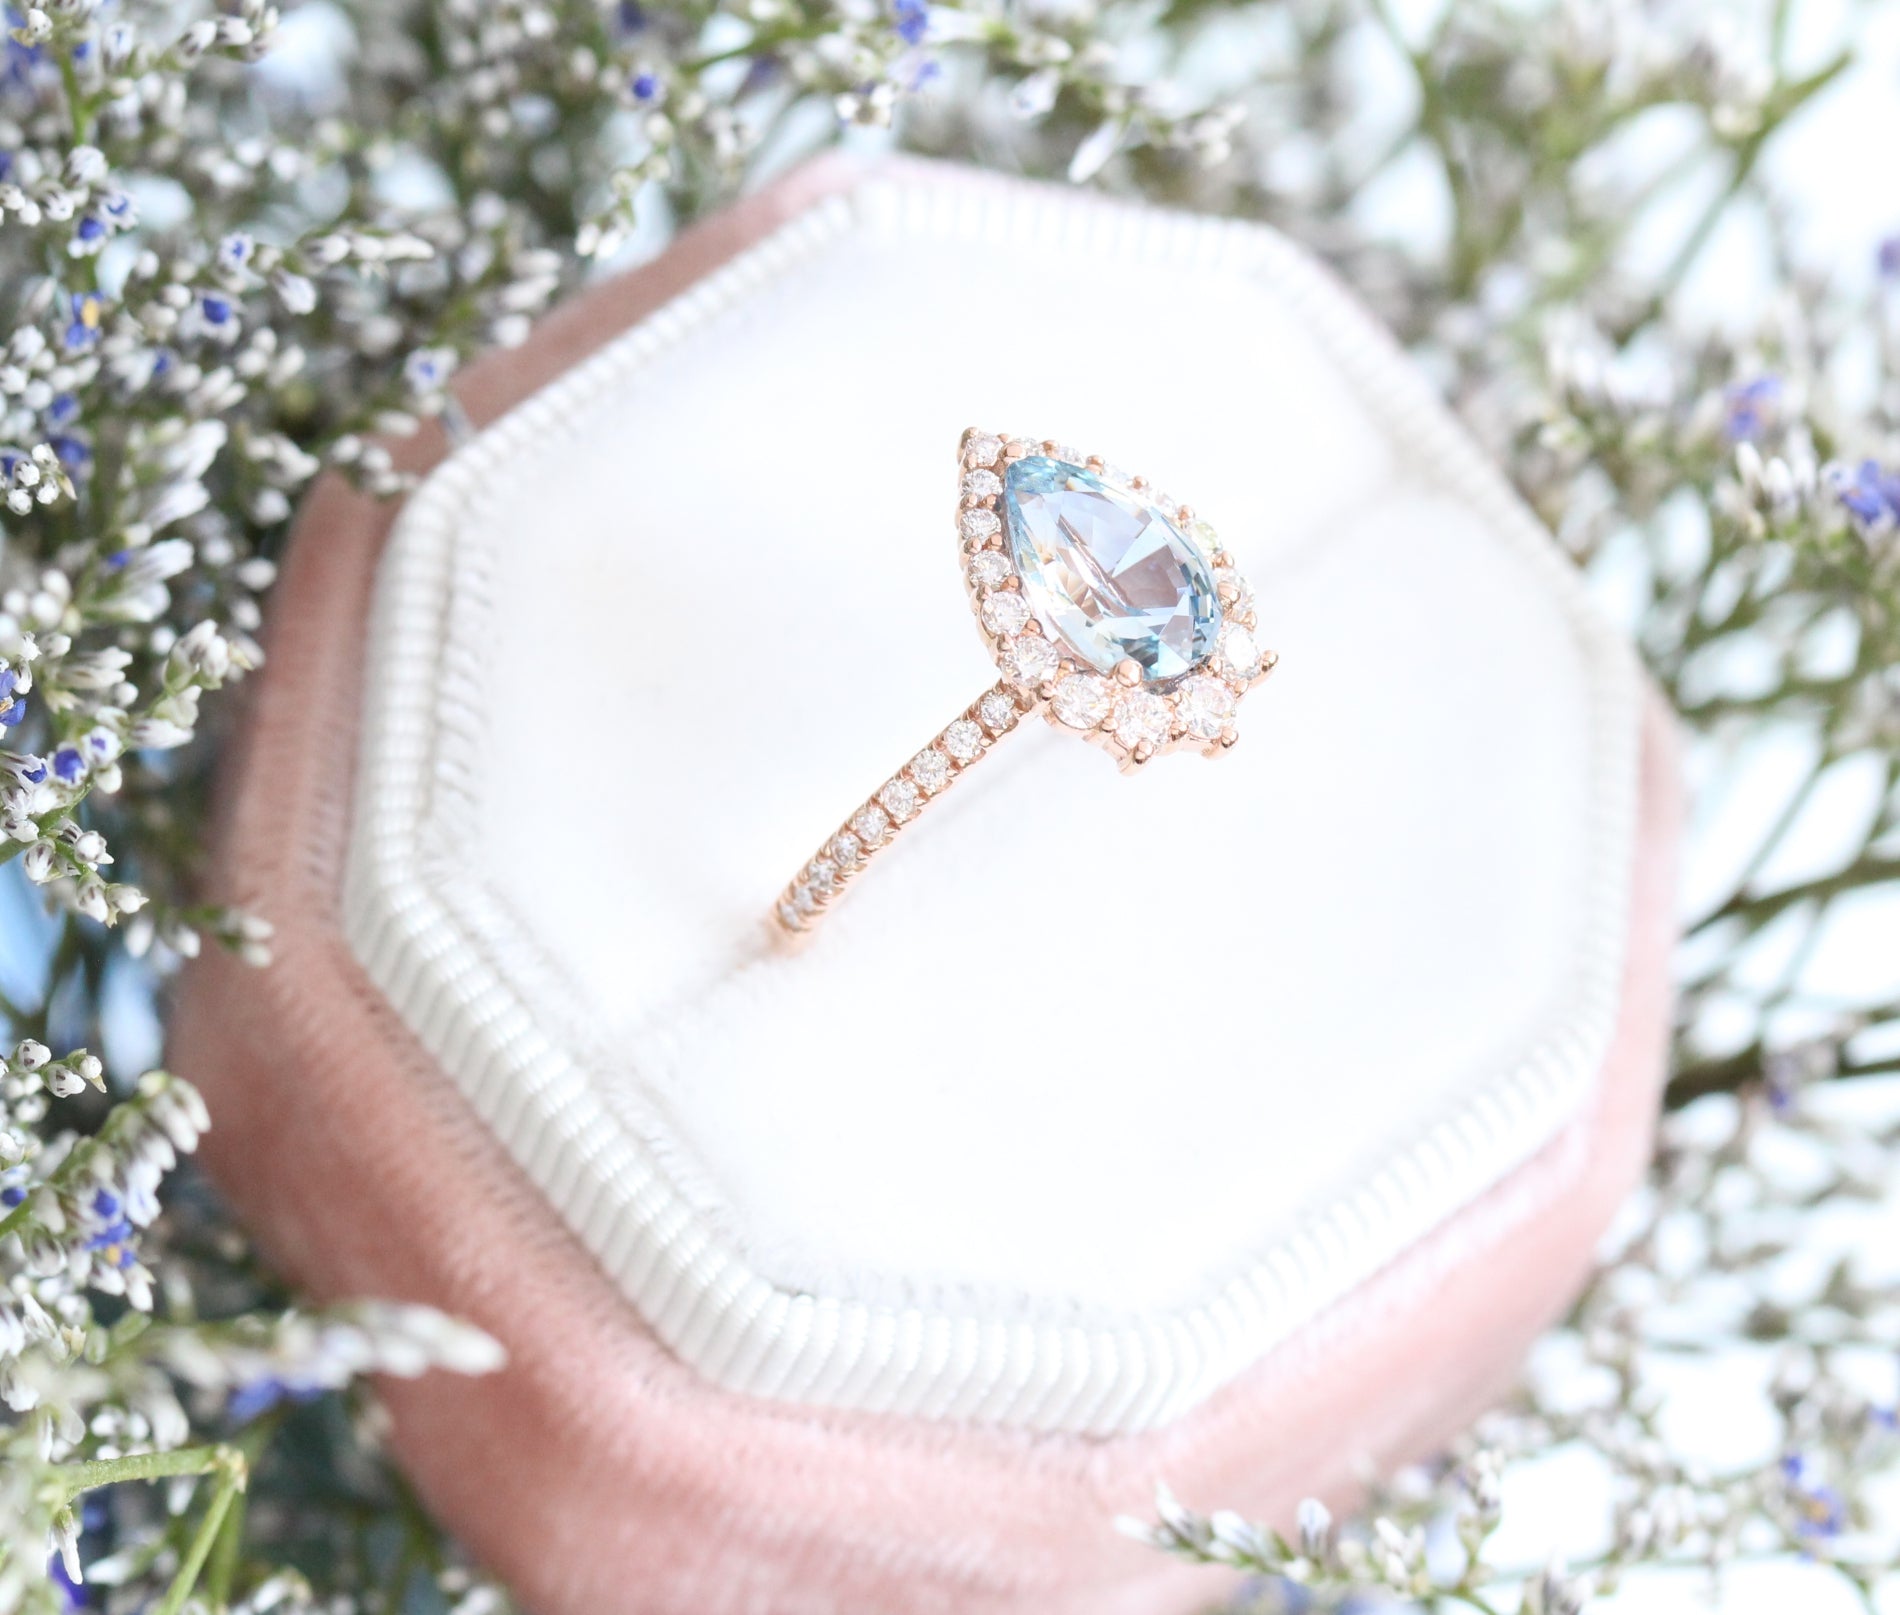 Aqua Blue Sapphire Engagement Ring Rose Gold Halo Diamond Pear Ring by La More Design Jewelry